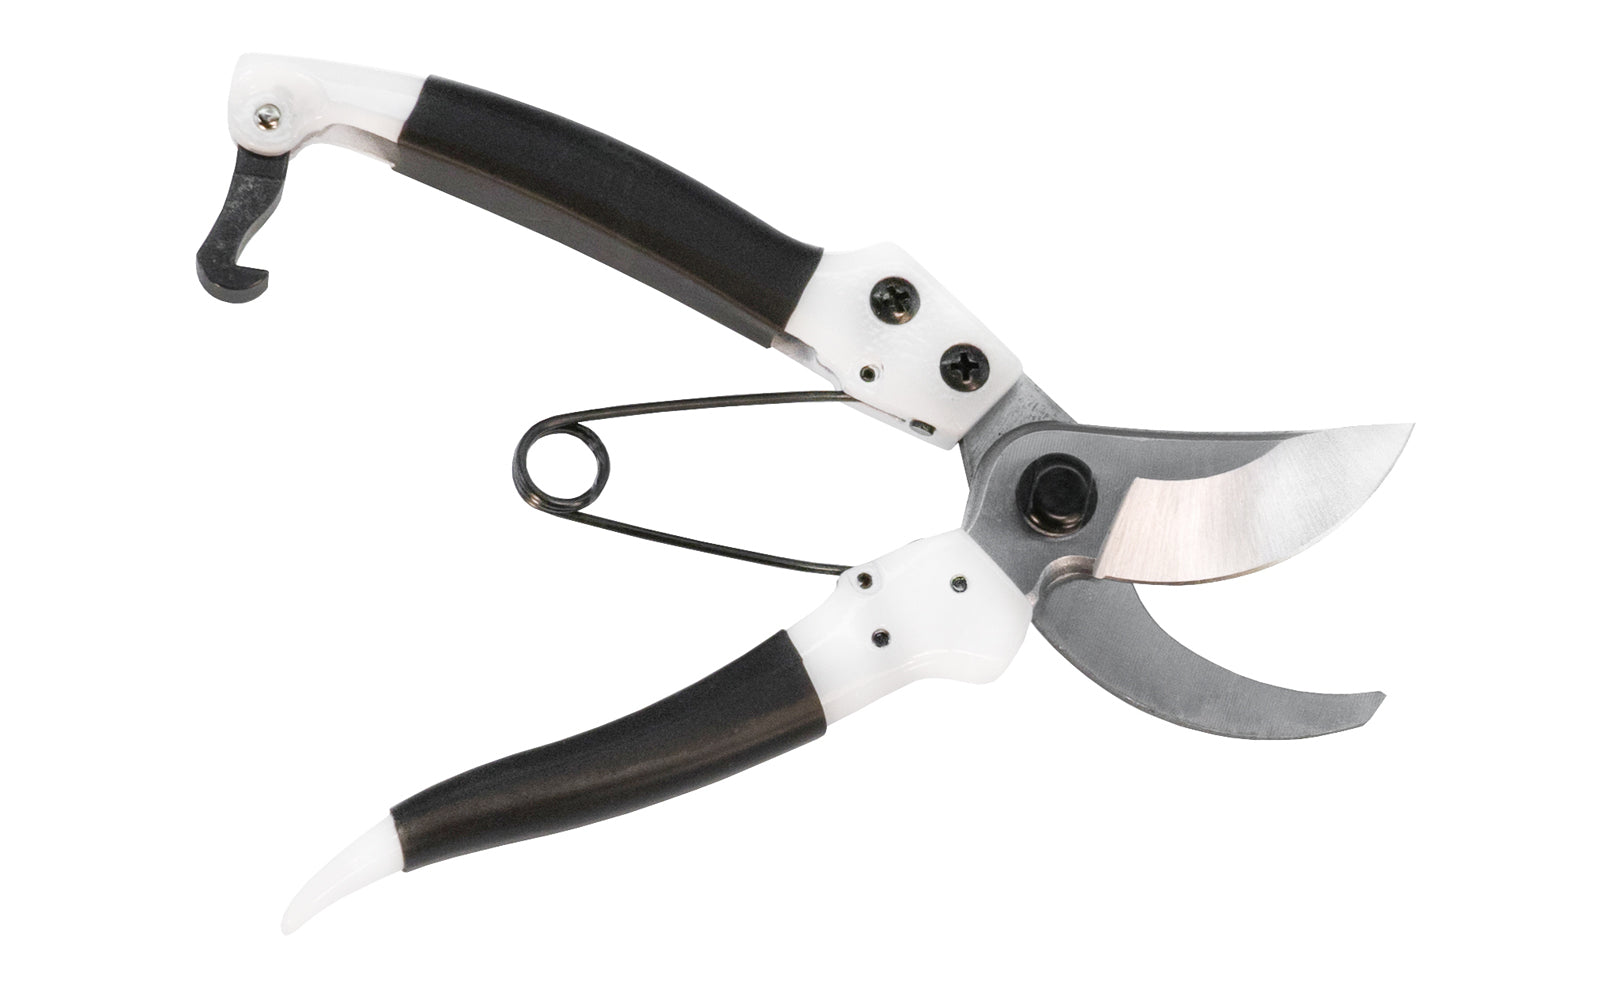 These Japanese Kamaki Bypass Pruners are good quality pruners that have nice smooth cuts. Great multi-purpose pruner great for many various garden tasks such as trimming, pruning, thinning, & general purpose cutting. Locking mechanism on the end of the handle. Rubberized no-slip grip handle. Model 880. 4953699008801